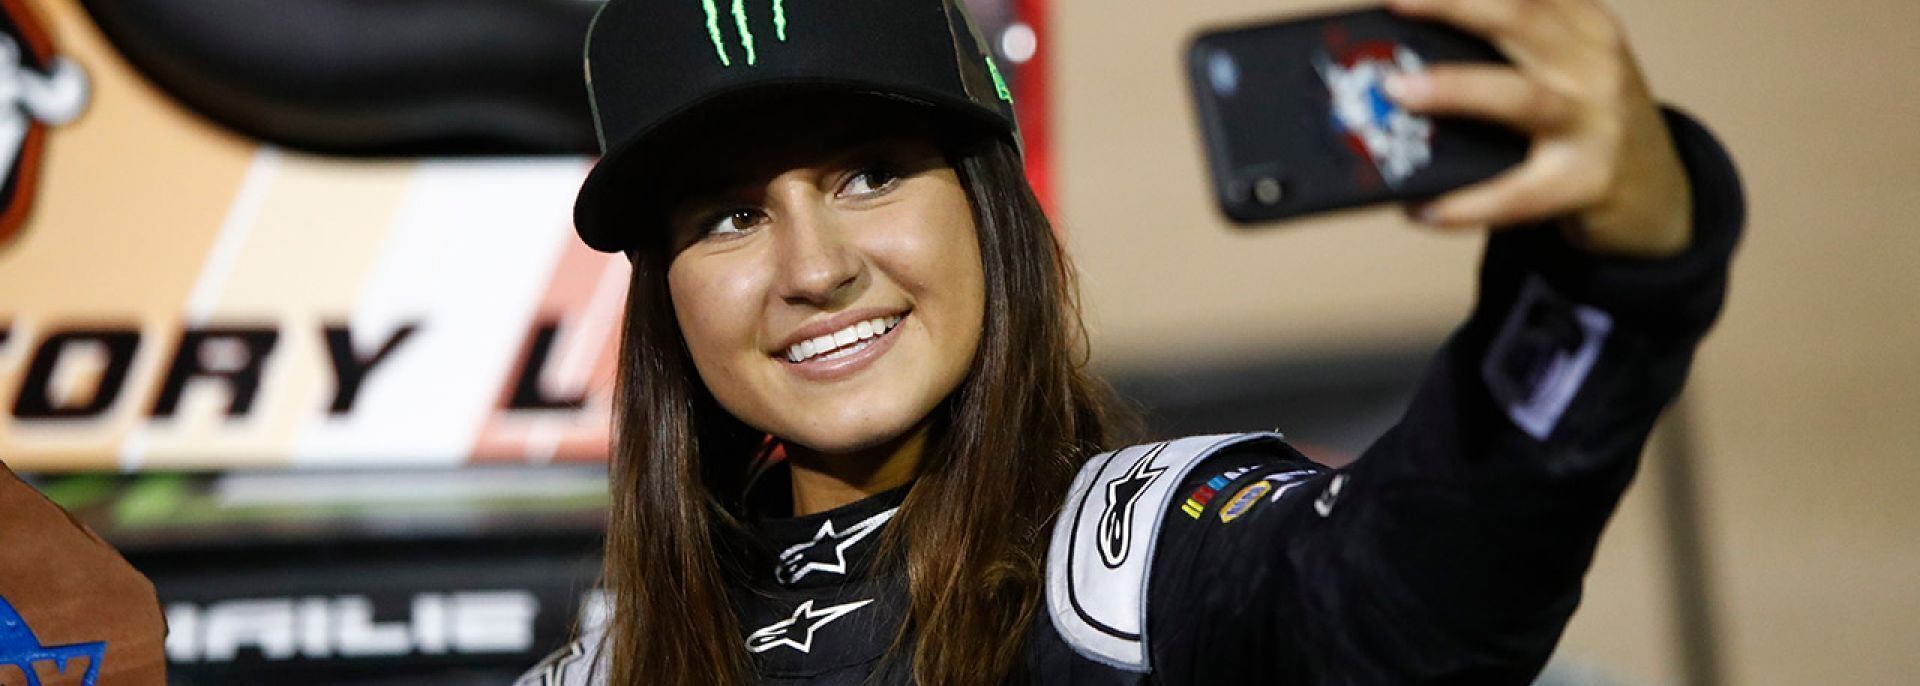 NASCAR sends driver Hailie Deegan for sensitivity training to use while racing online